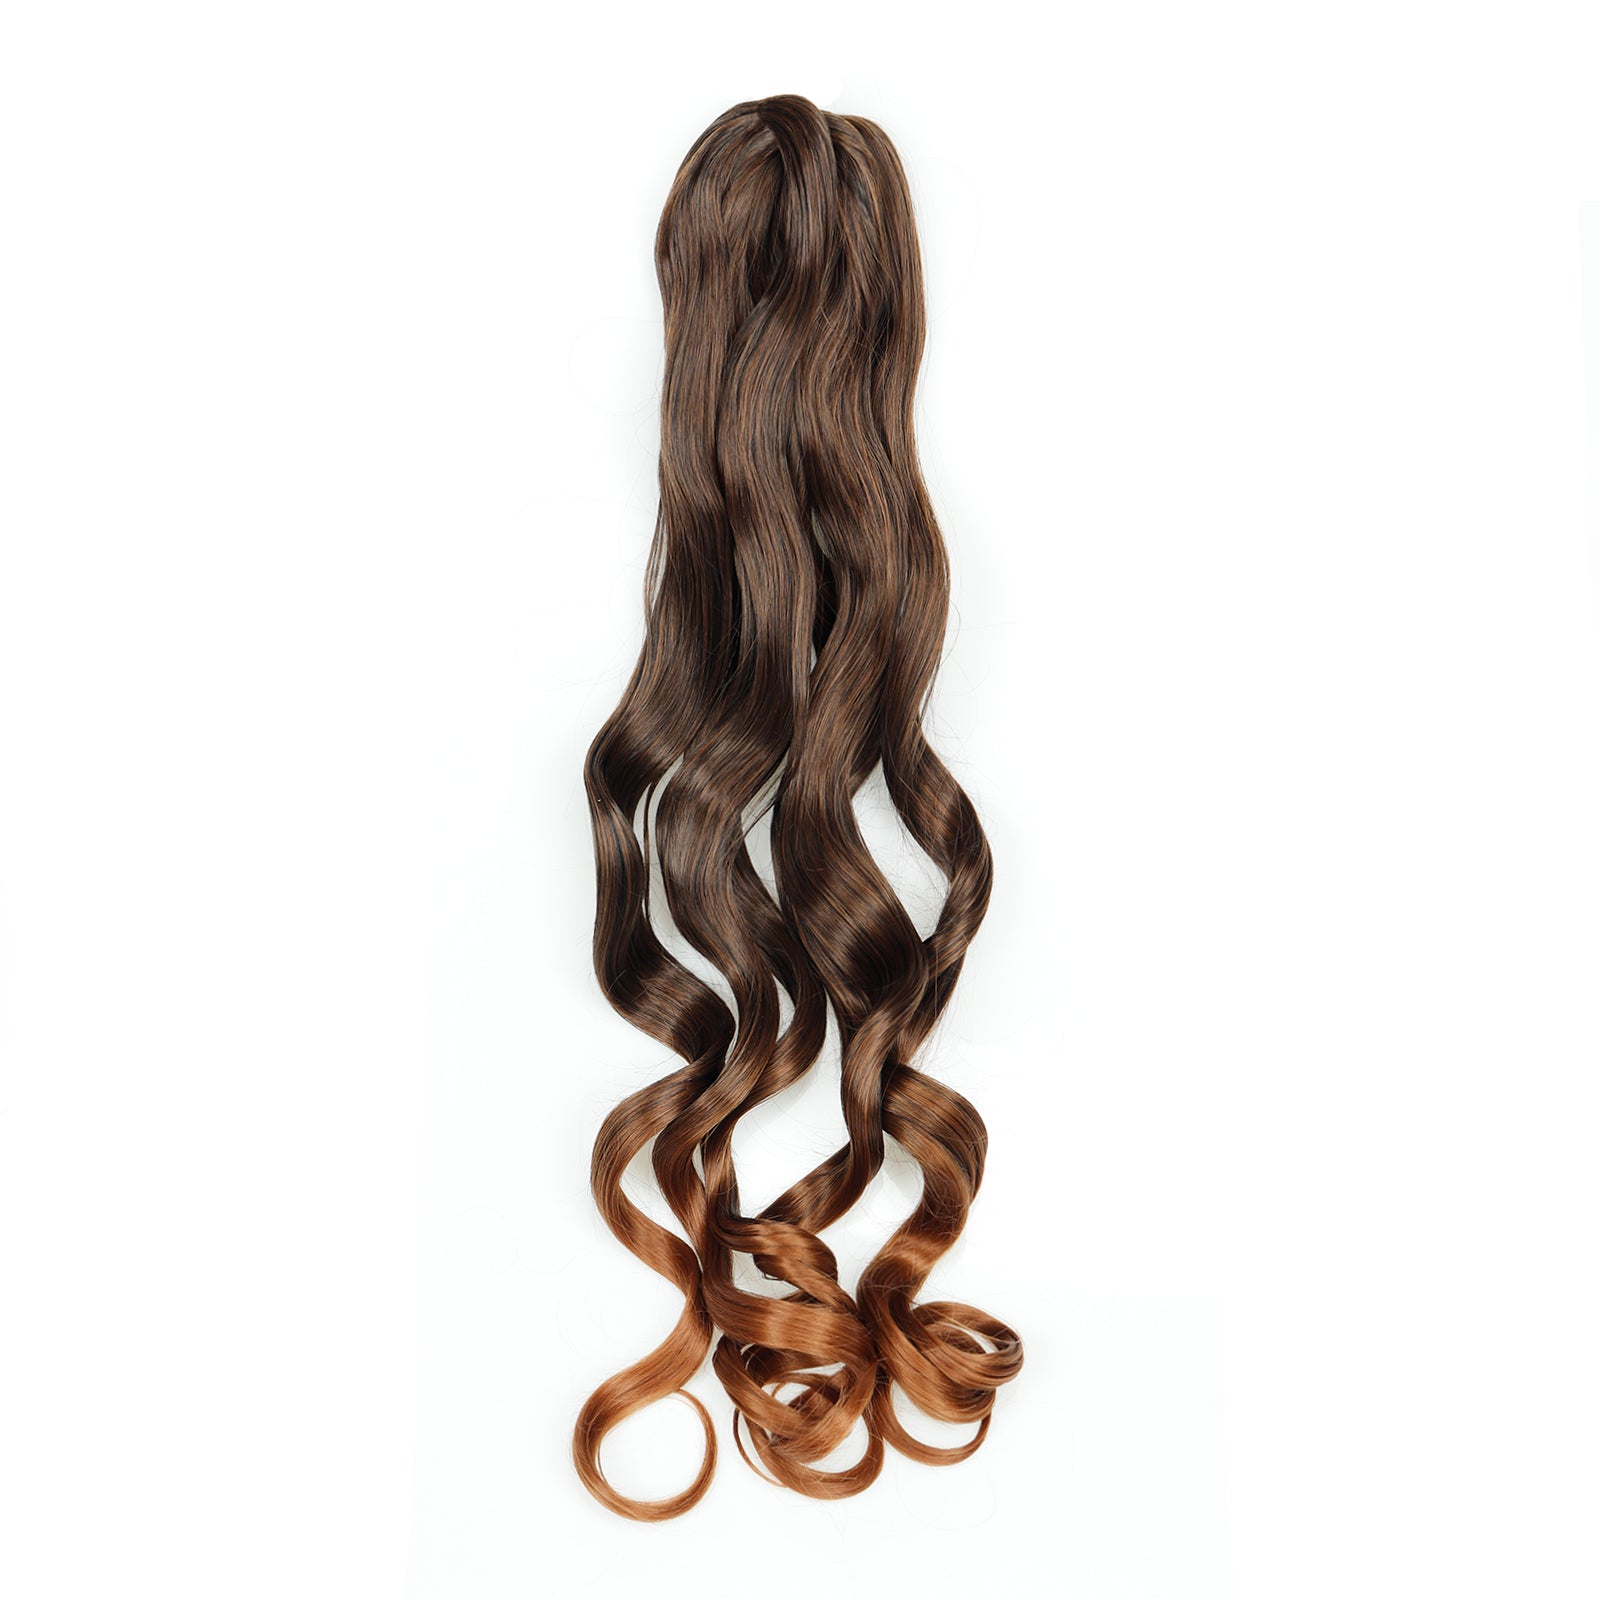 𝗩𝗼𝗼𝗱𝗼𝗼 𝗩𝗲𝗿𝘃𝗲 | Toyotress French Curly Braiding Hair Loose Wave Braiding Hair Pre-Stretched Synthetic Hair Extensions